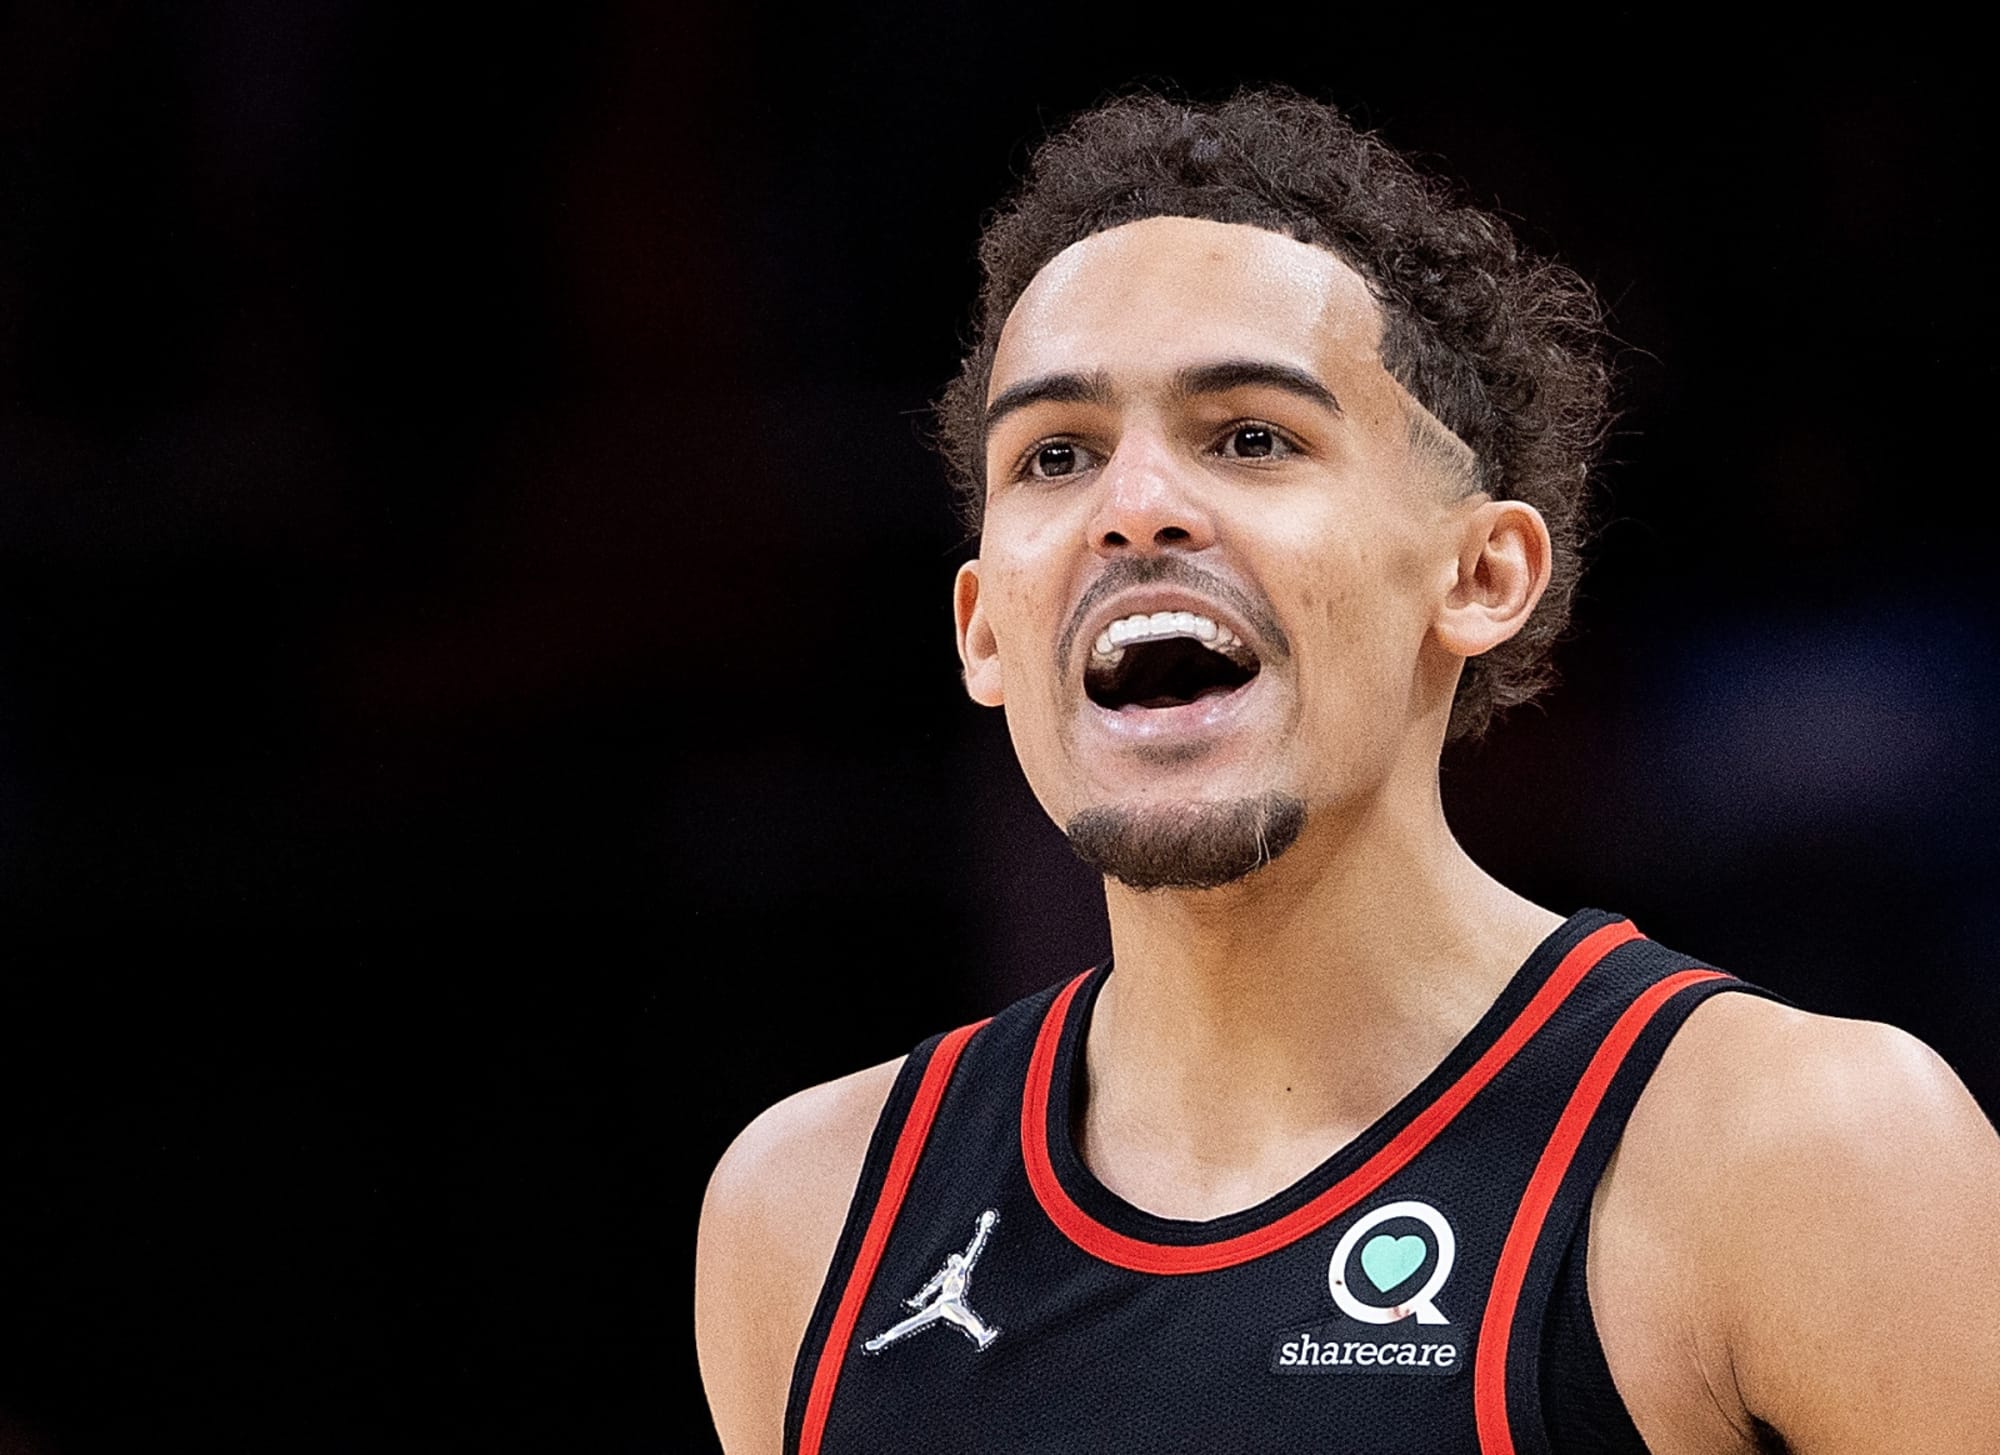 Atlanta Hawks star Trae Young sounds off on new teammate